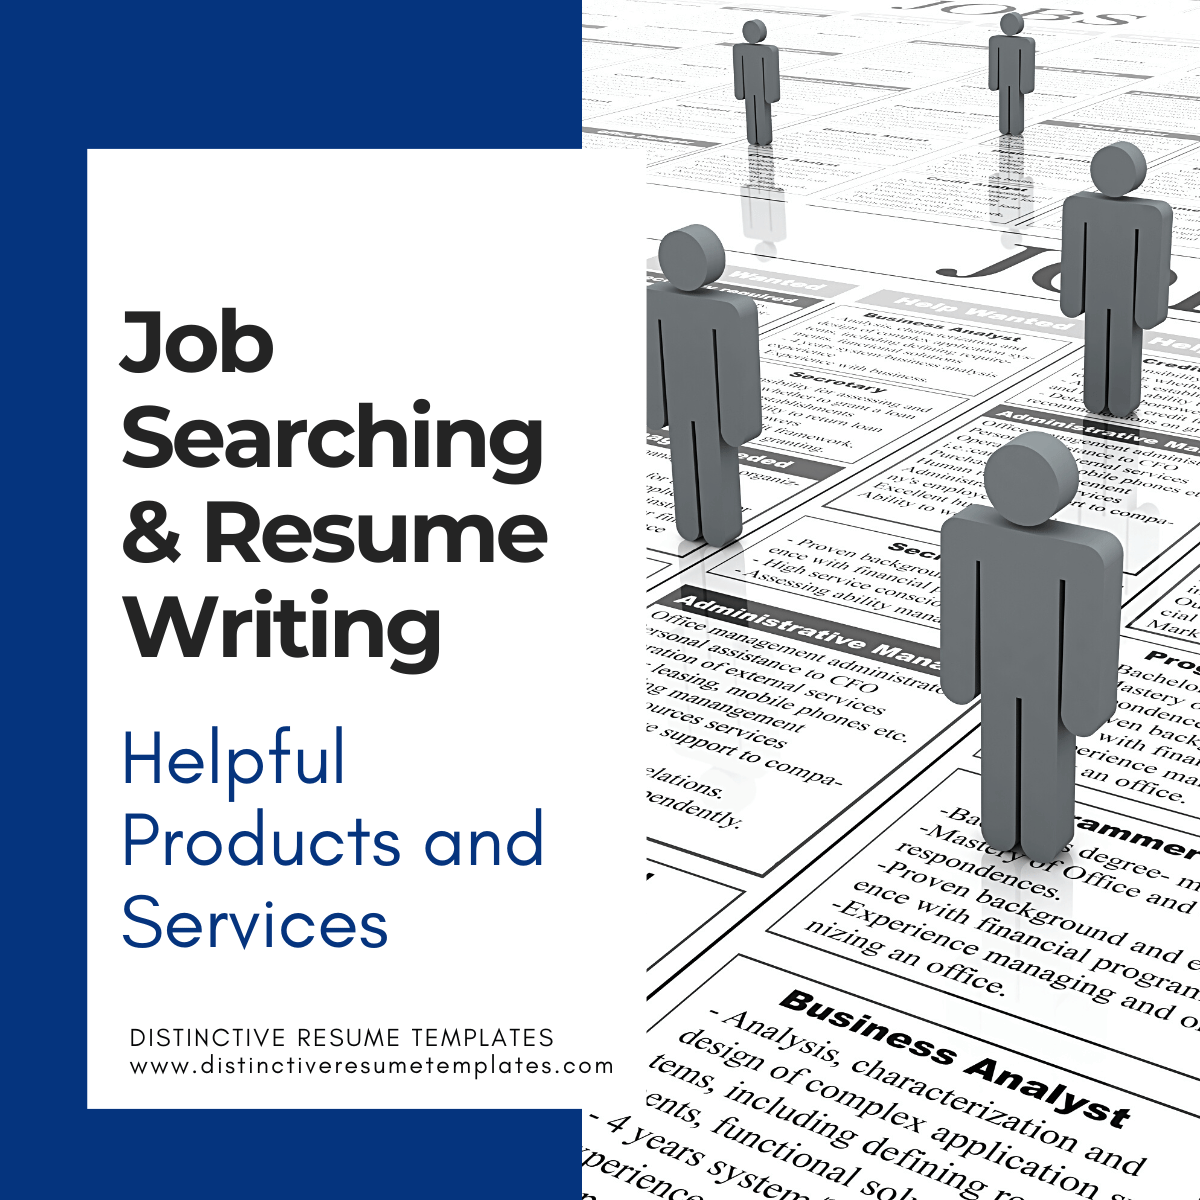 Job Searching & Resume Writing Helpful Products